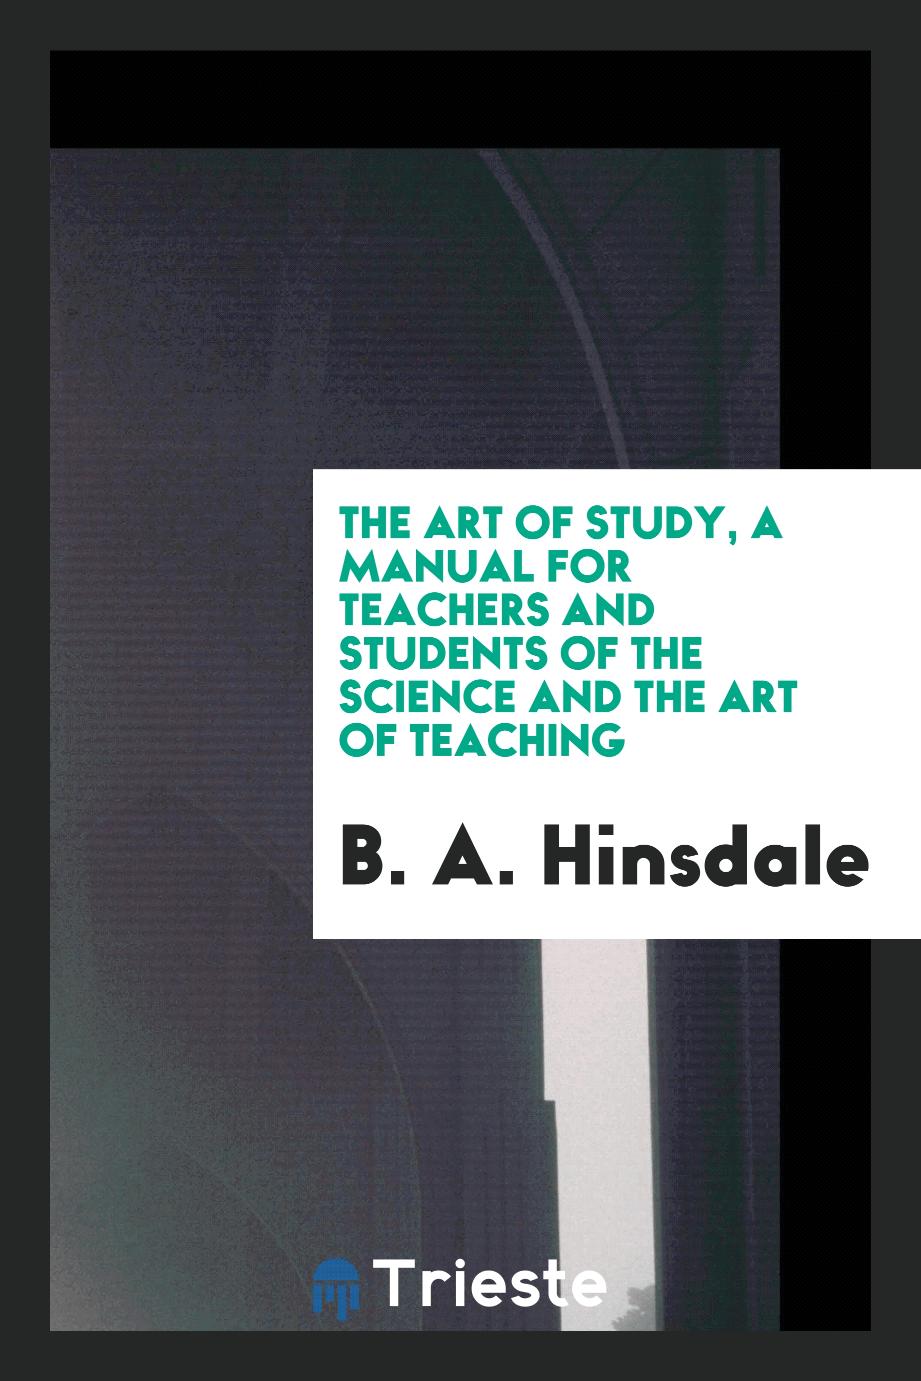 The art of study, a manual for teachers and students of the science and the art of teaching